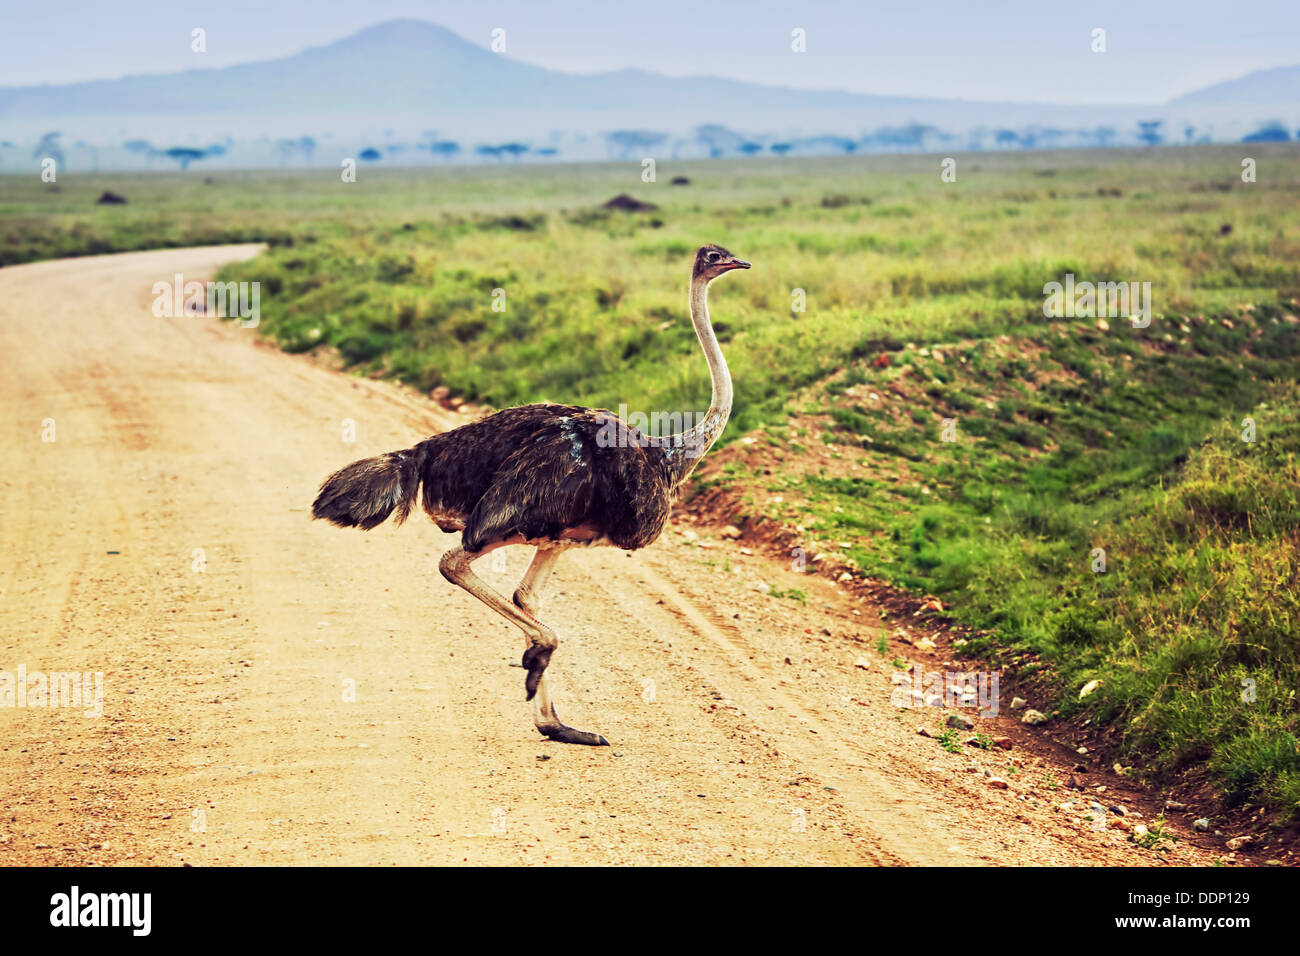 Ostrich in the Serengeti National Park, Tanzania Stock Photo